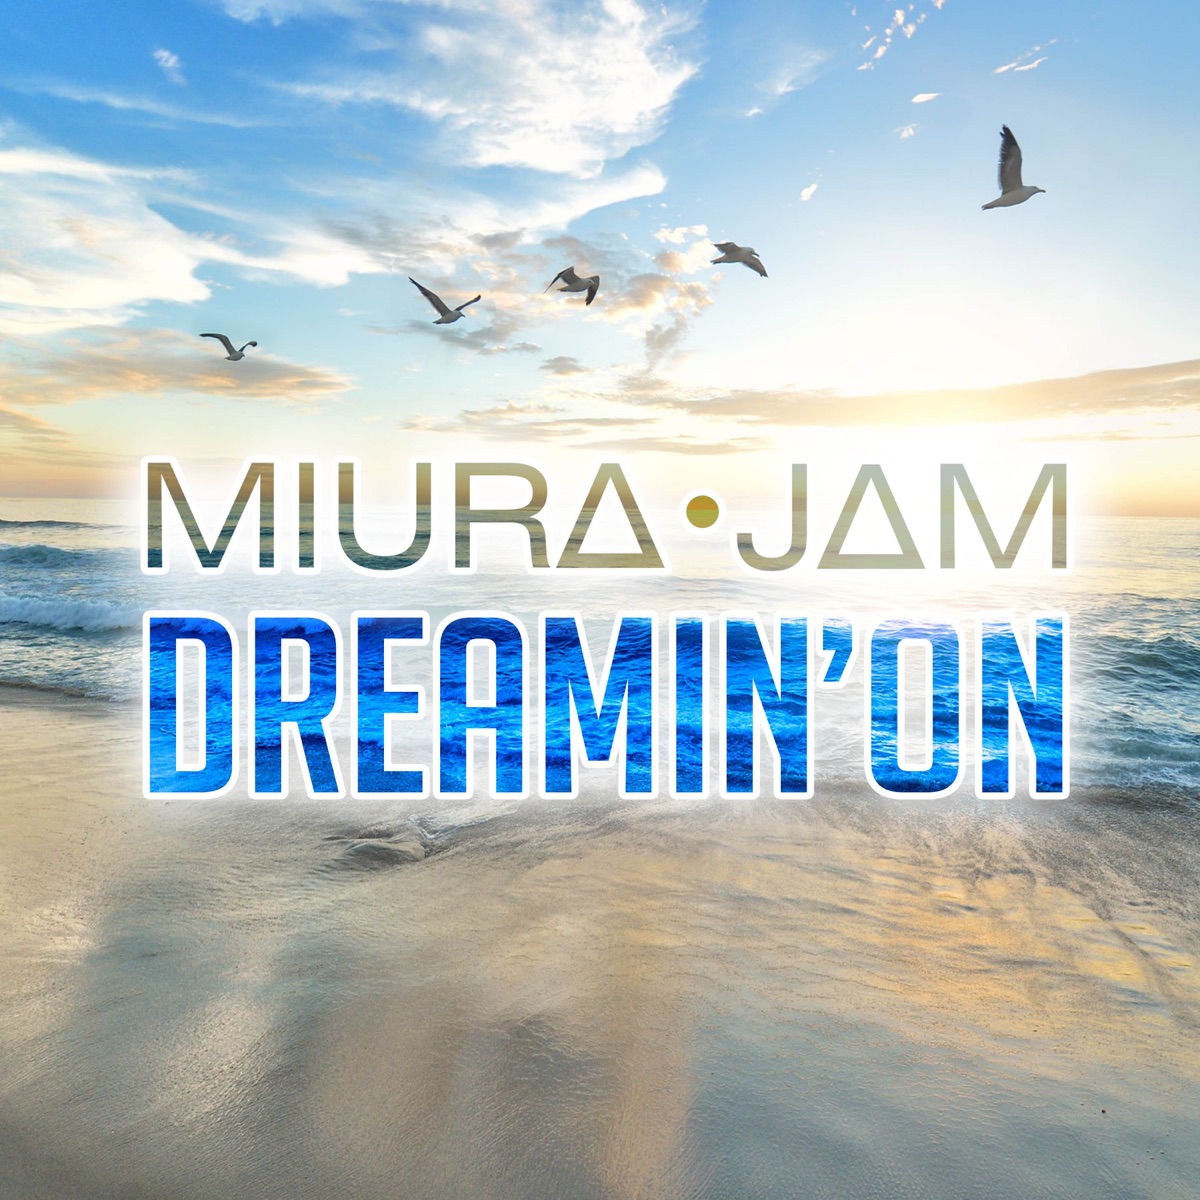 ᐉ Dreamin On From One Piece Mp3 3kbps Flac Download Soundtracks